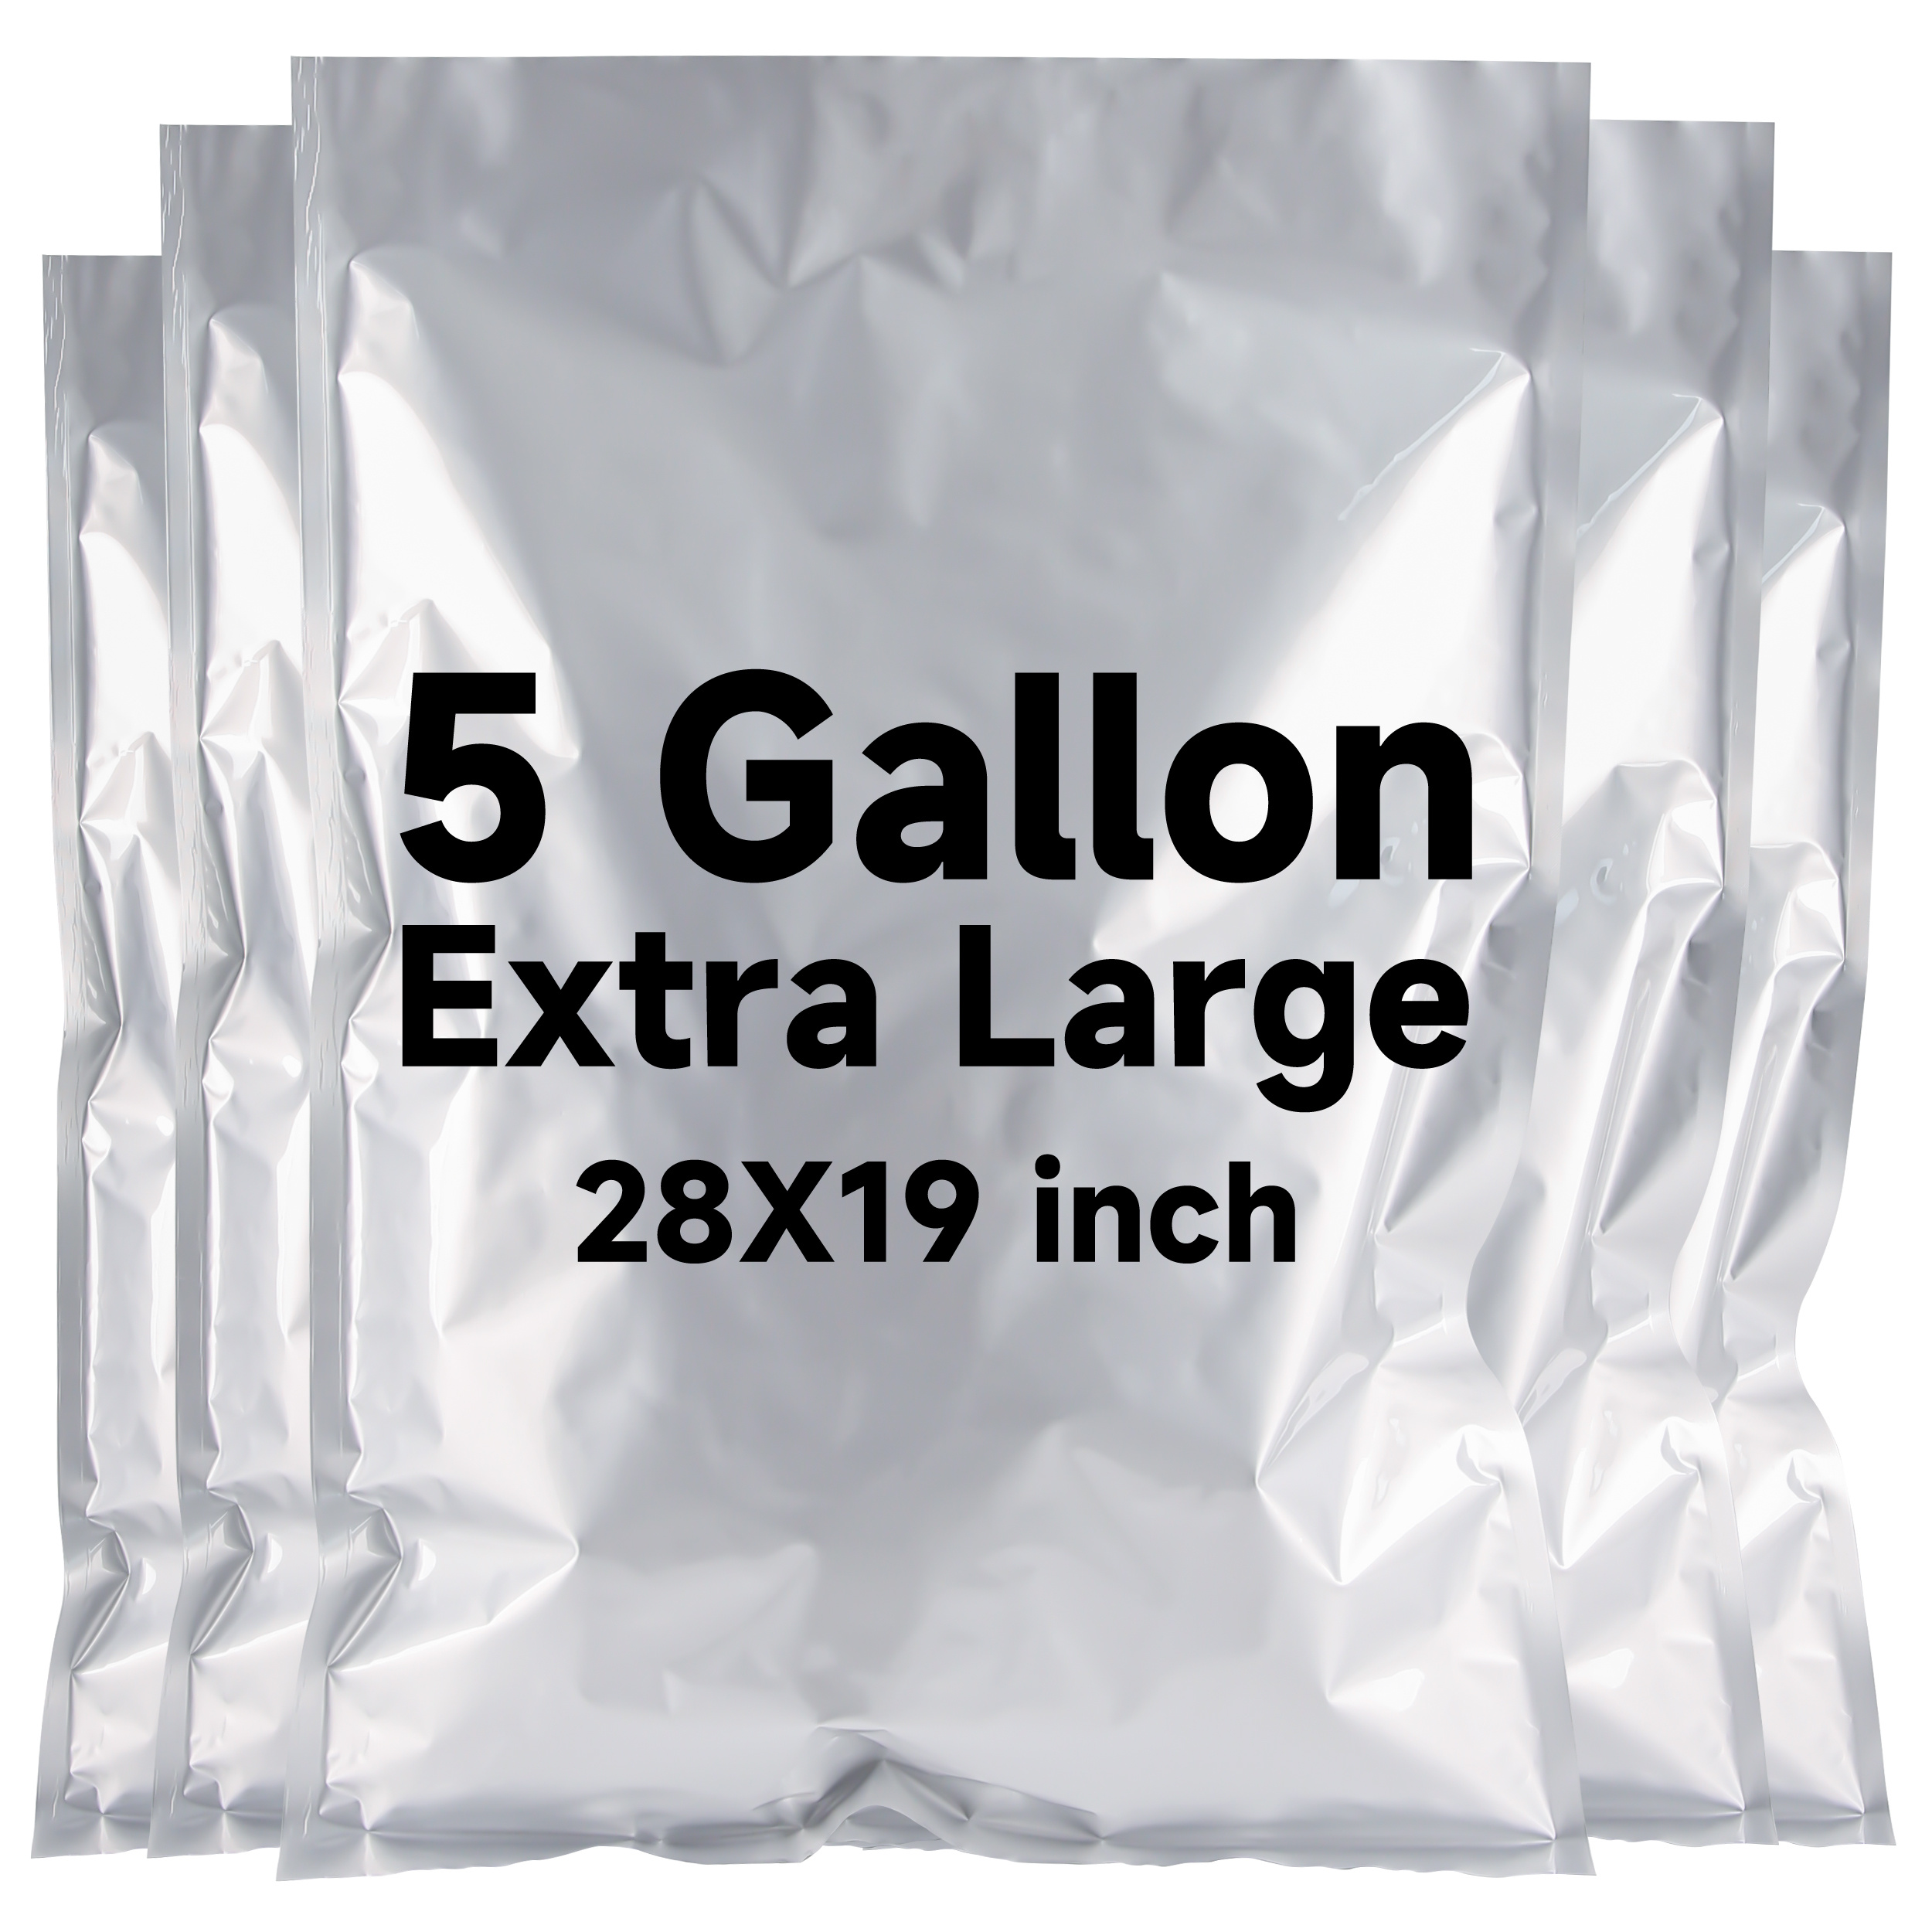 30 Mylar Bags for Food Storage 1 Gallon - Extra Thick 15 Mil - Long Term